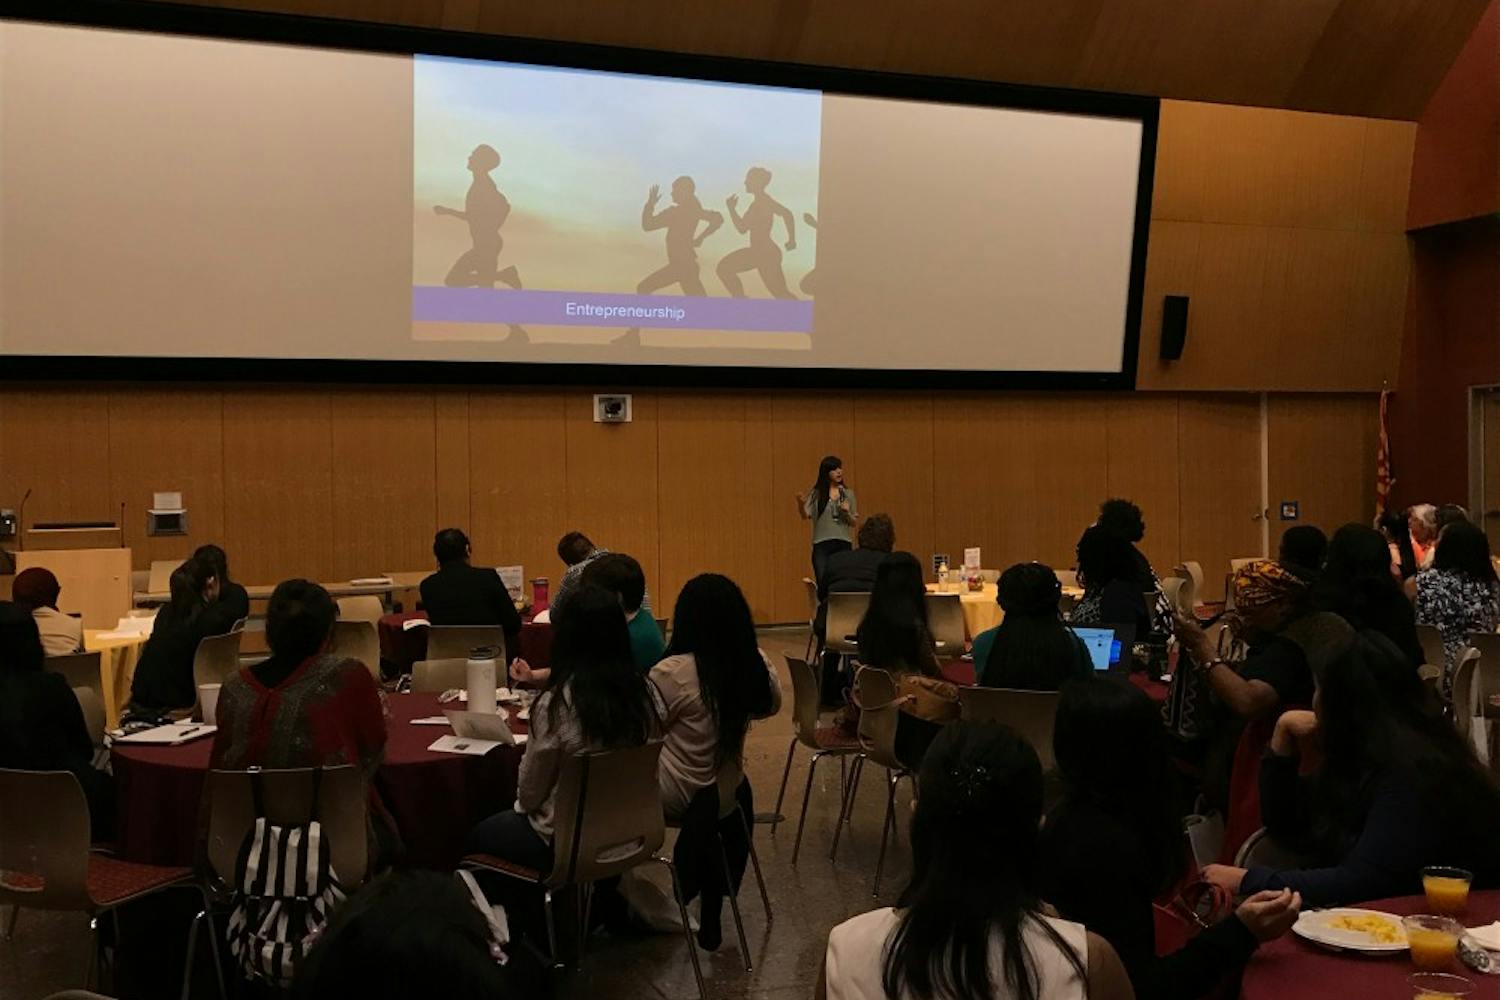 A group of listeners hearing from Laura Gomez, CEO and founder of Atipica, who delivered an inspiring talk at GateWay Community College during the Women of Color STEM Entrepreneurship Conference on Friday, March 24, 2017.